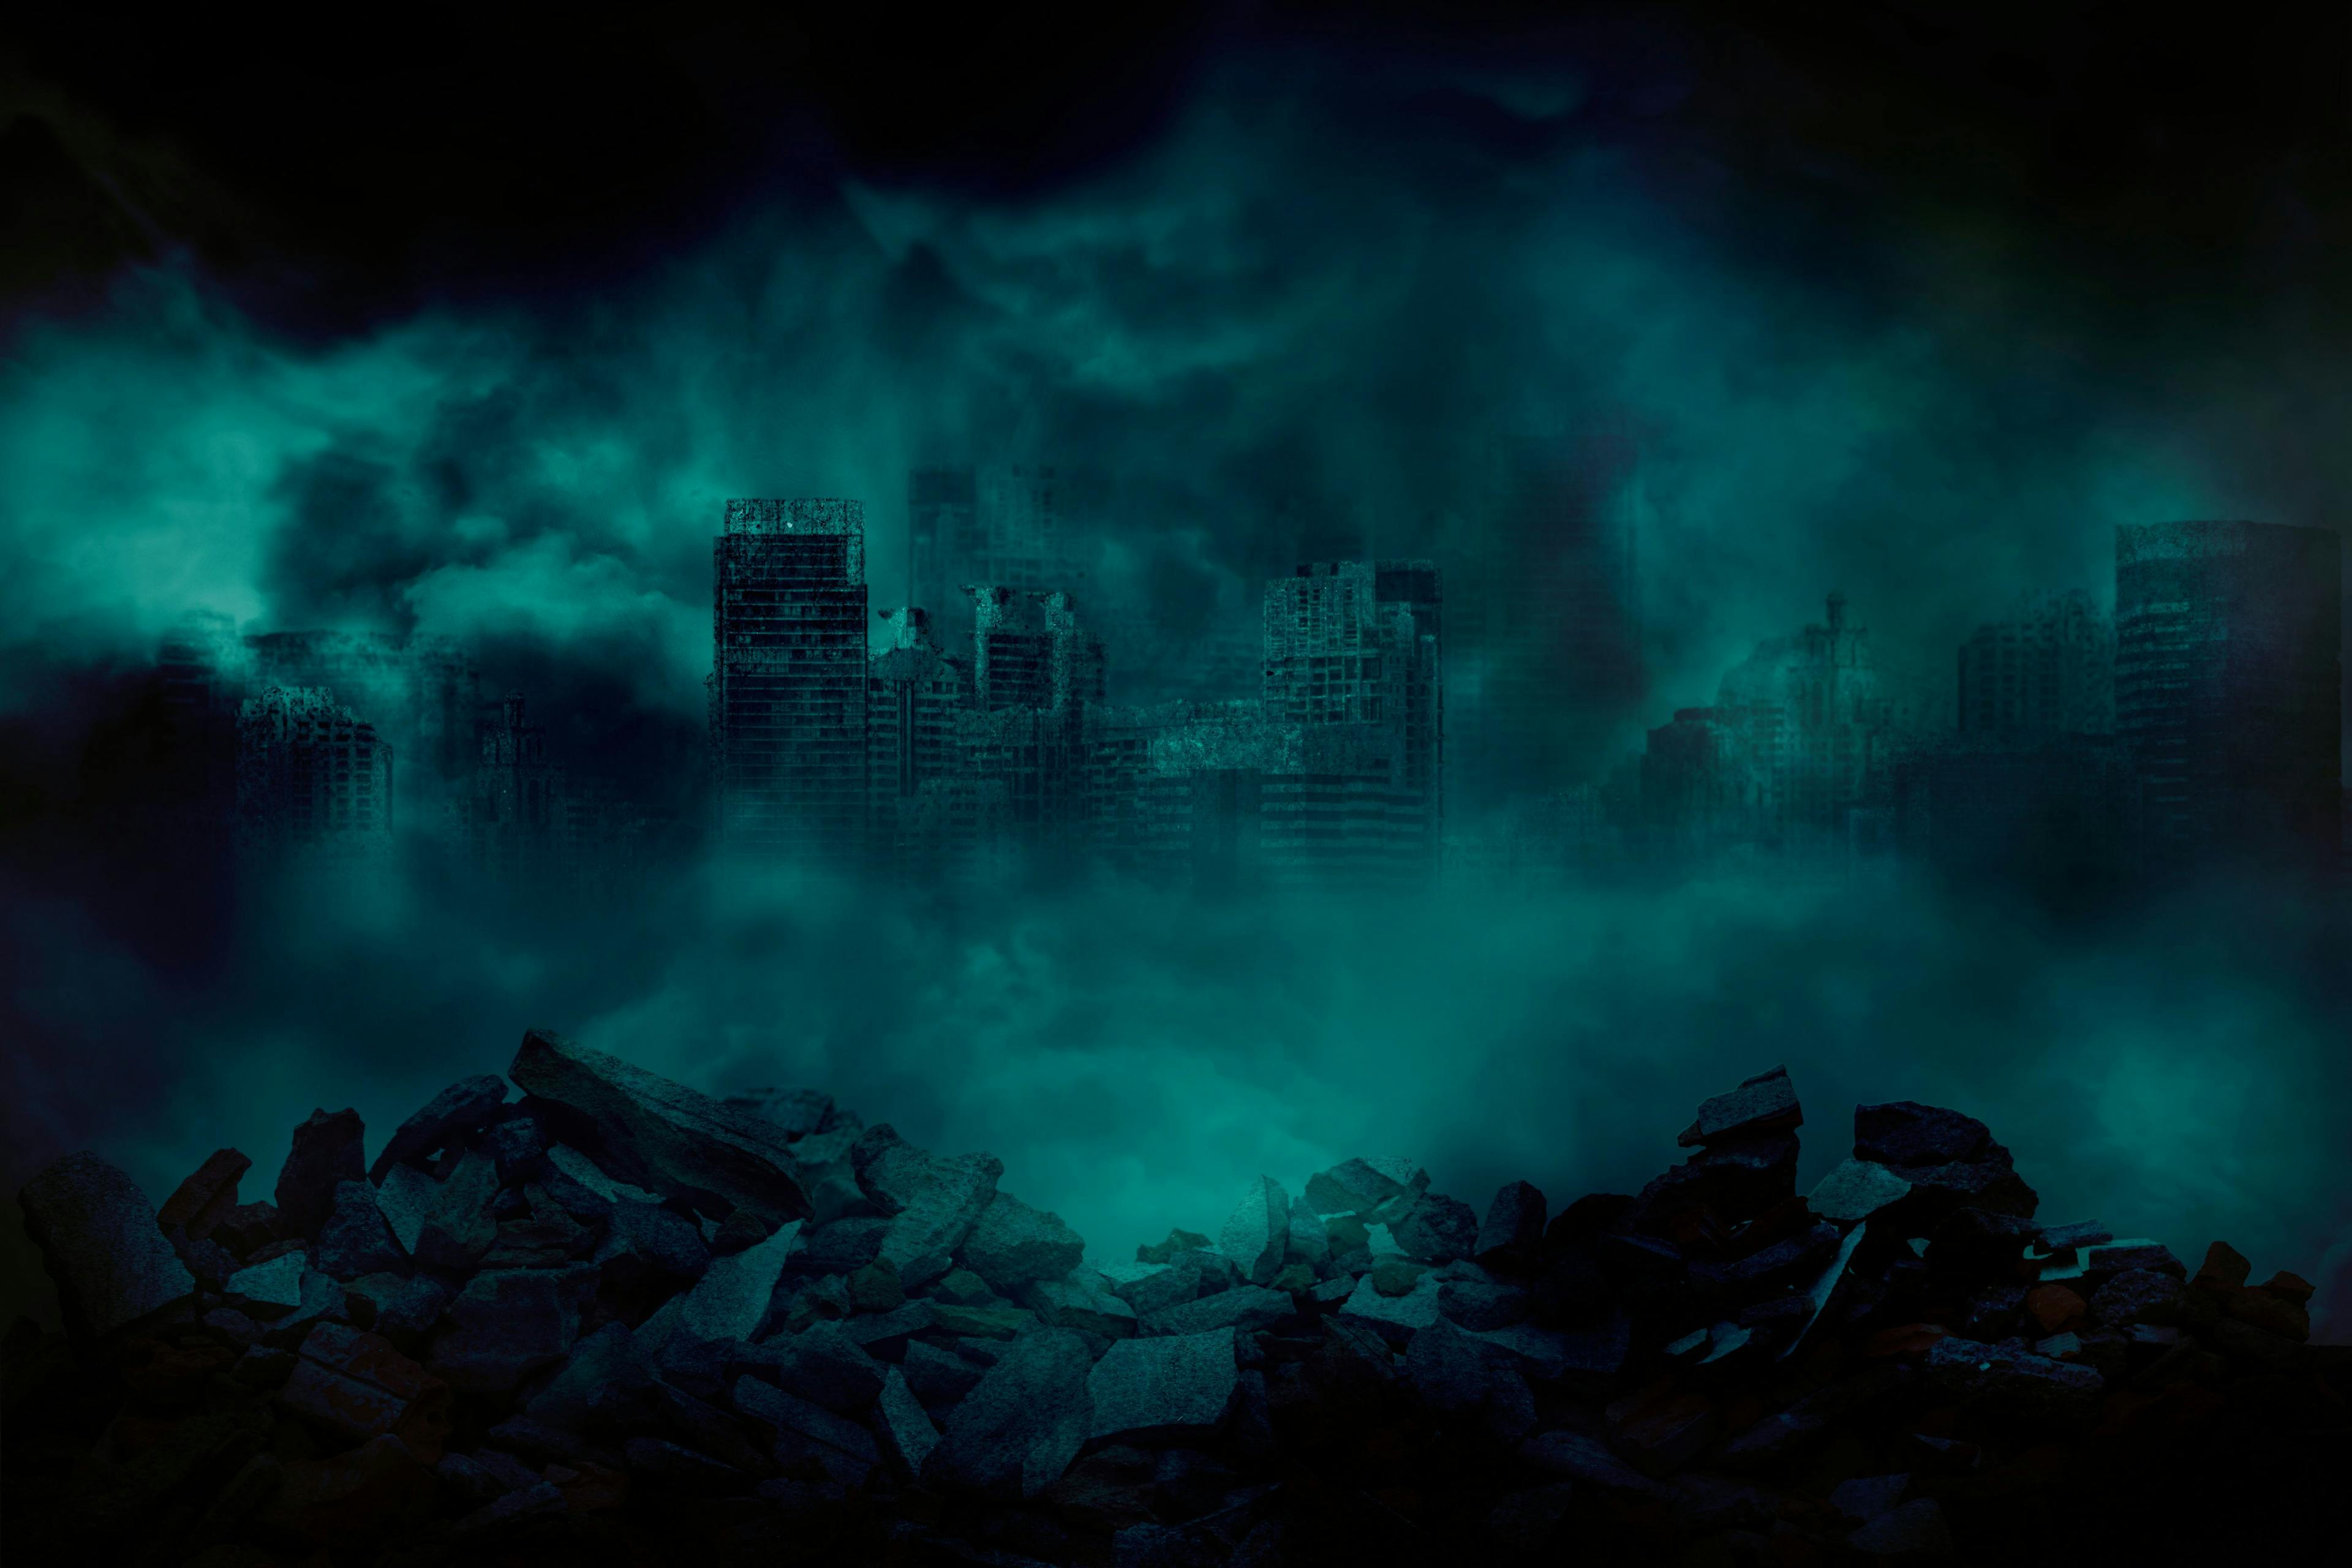 The ruins of a large city building with pieces of concrete and brick rubble debris in front are covered with smoke from the civil war and the city abandonment, concept of war | Image Credit: © holwichaikawee - stock.adobe.com